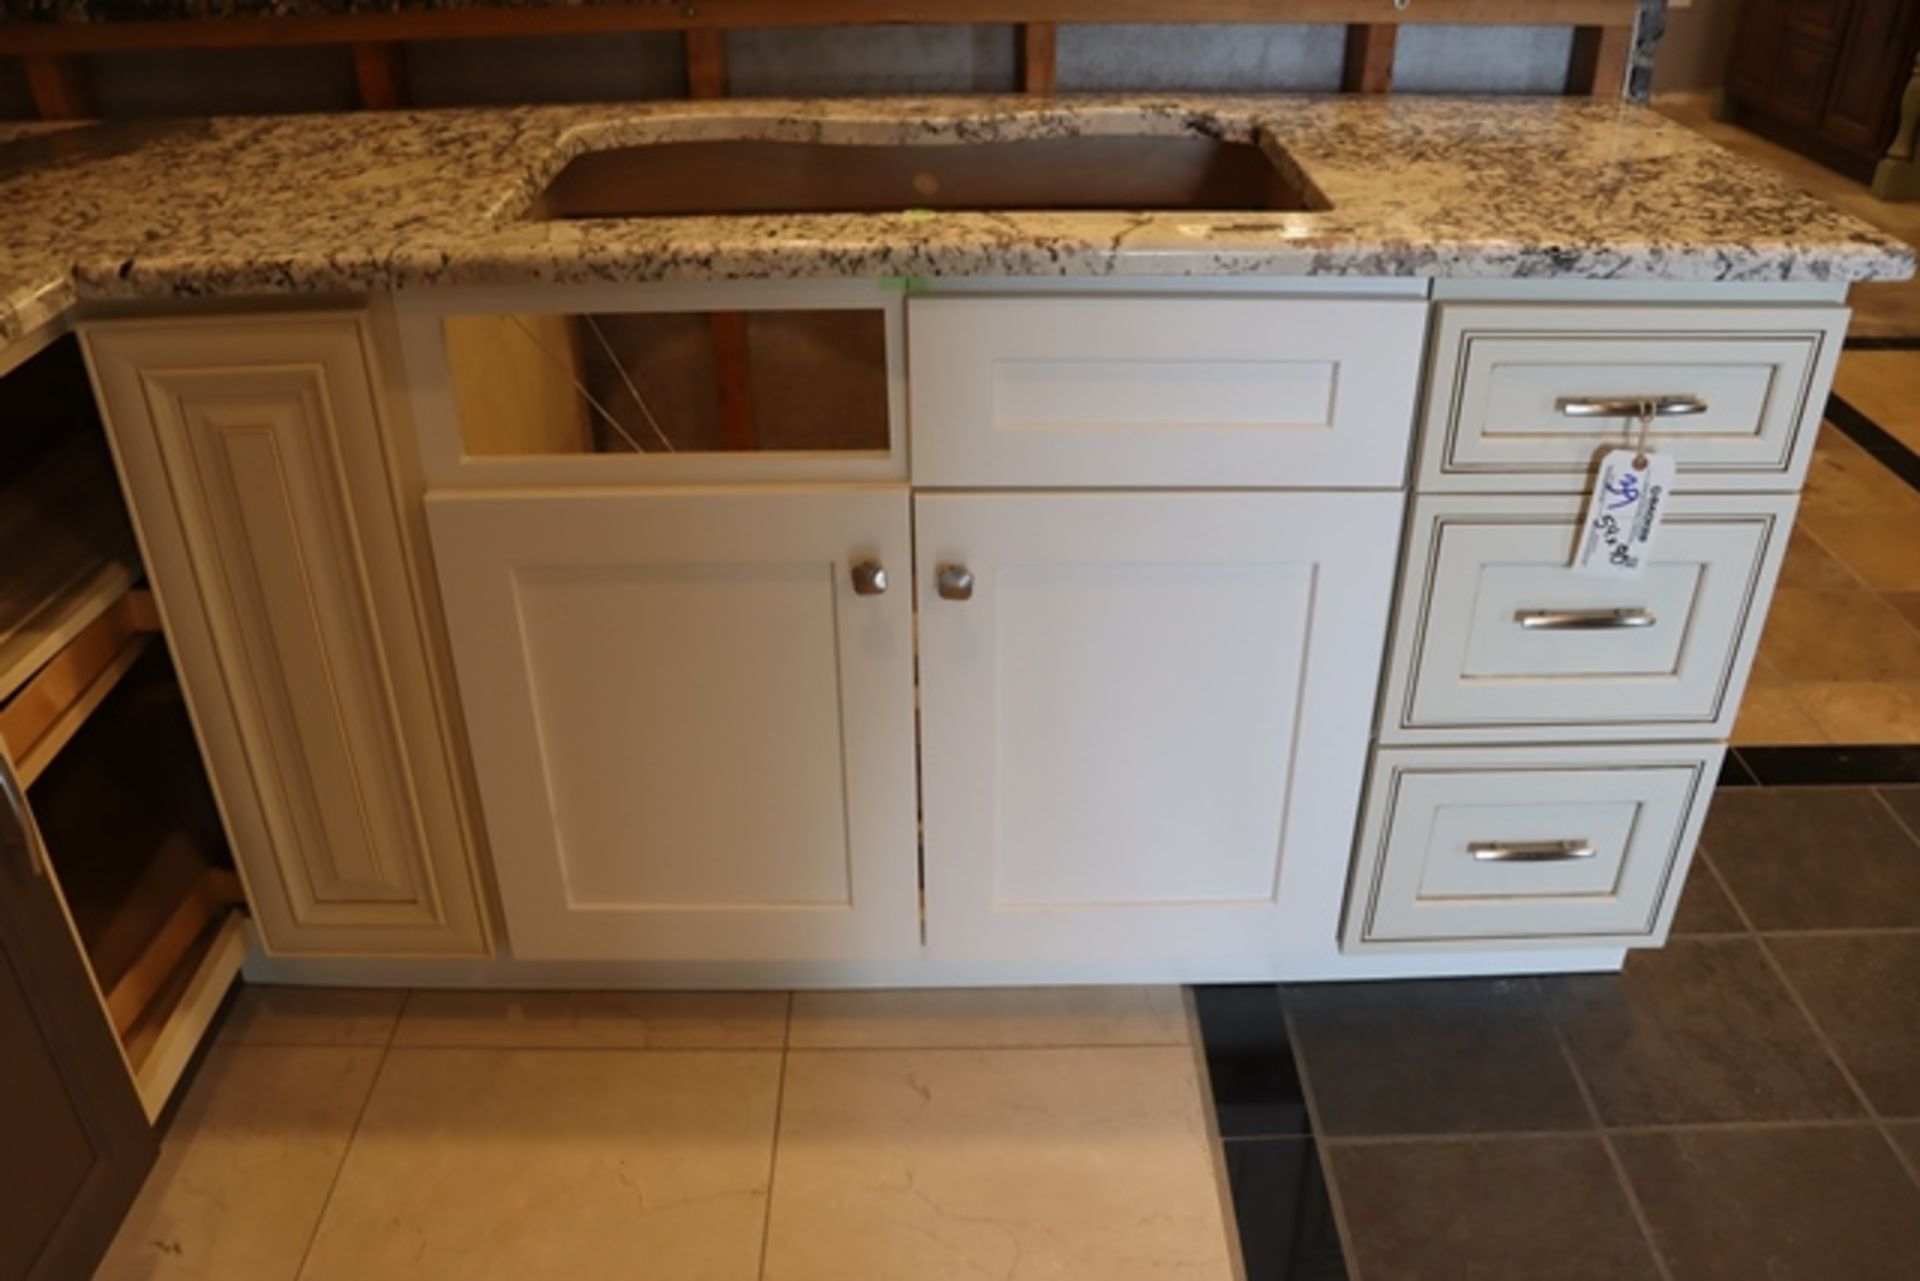 54" x 90" L shaped kitchen display with granite top